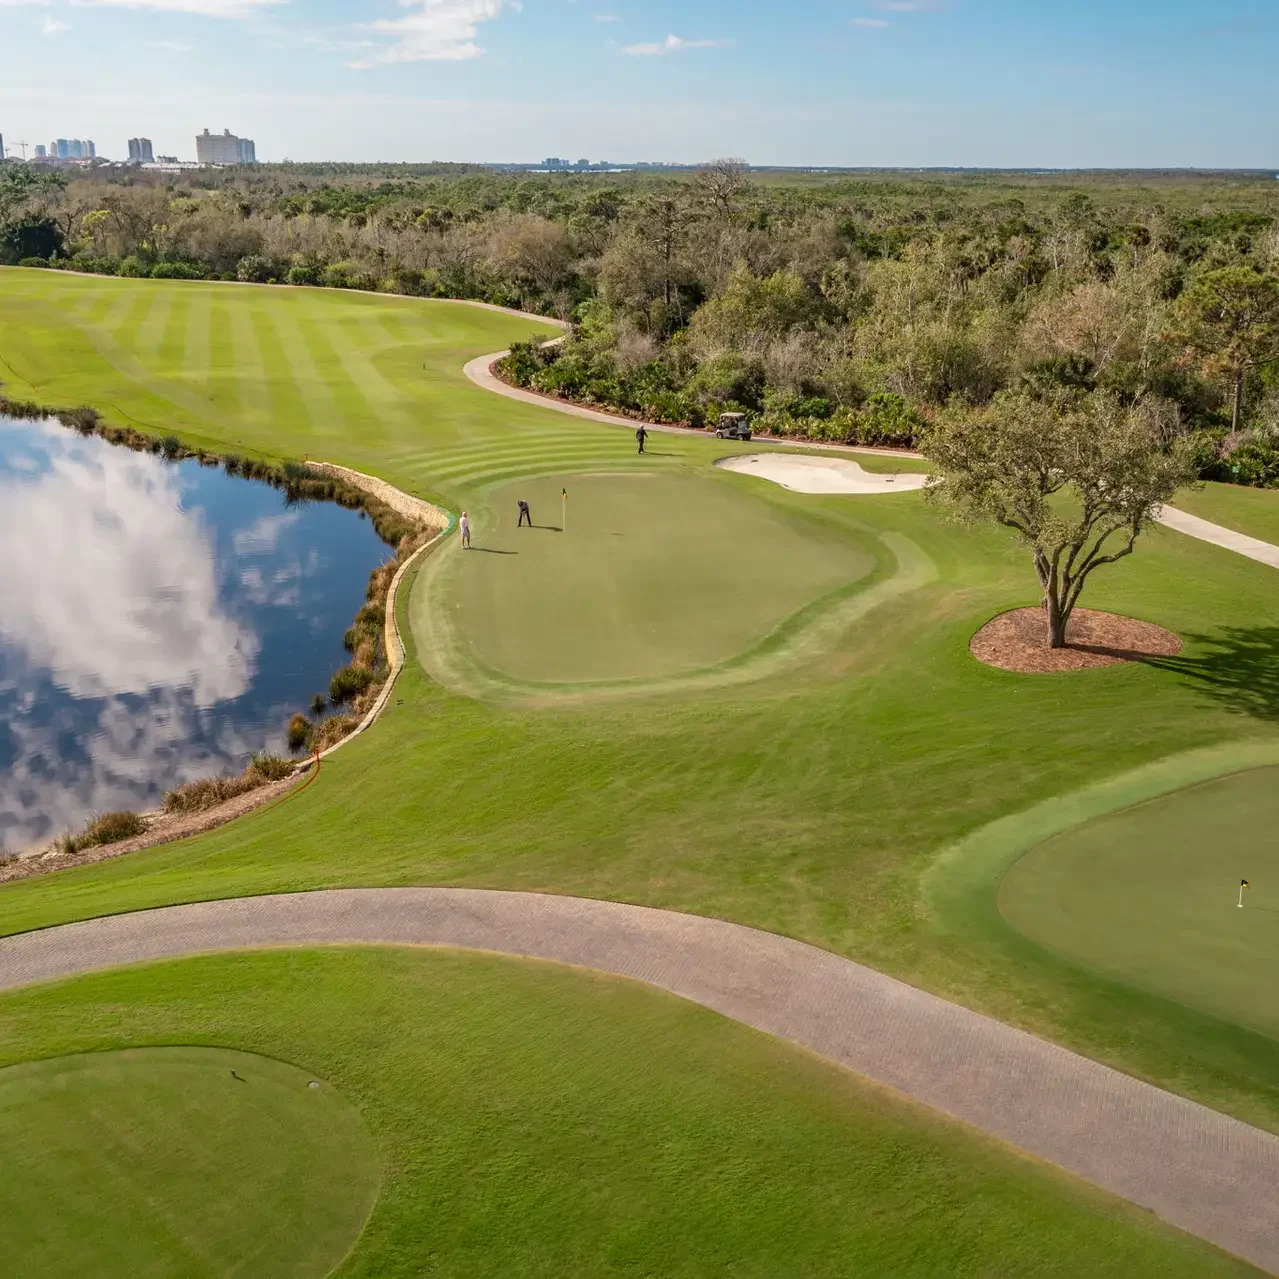 <a href="https://westbayclubhomes.com/lifestyle/golf/">Championship Golf</a>